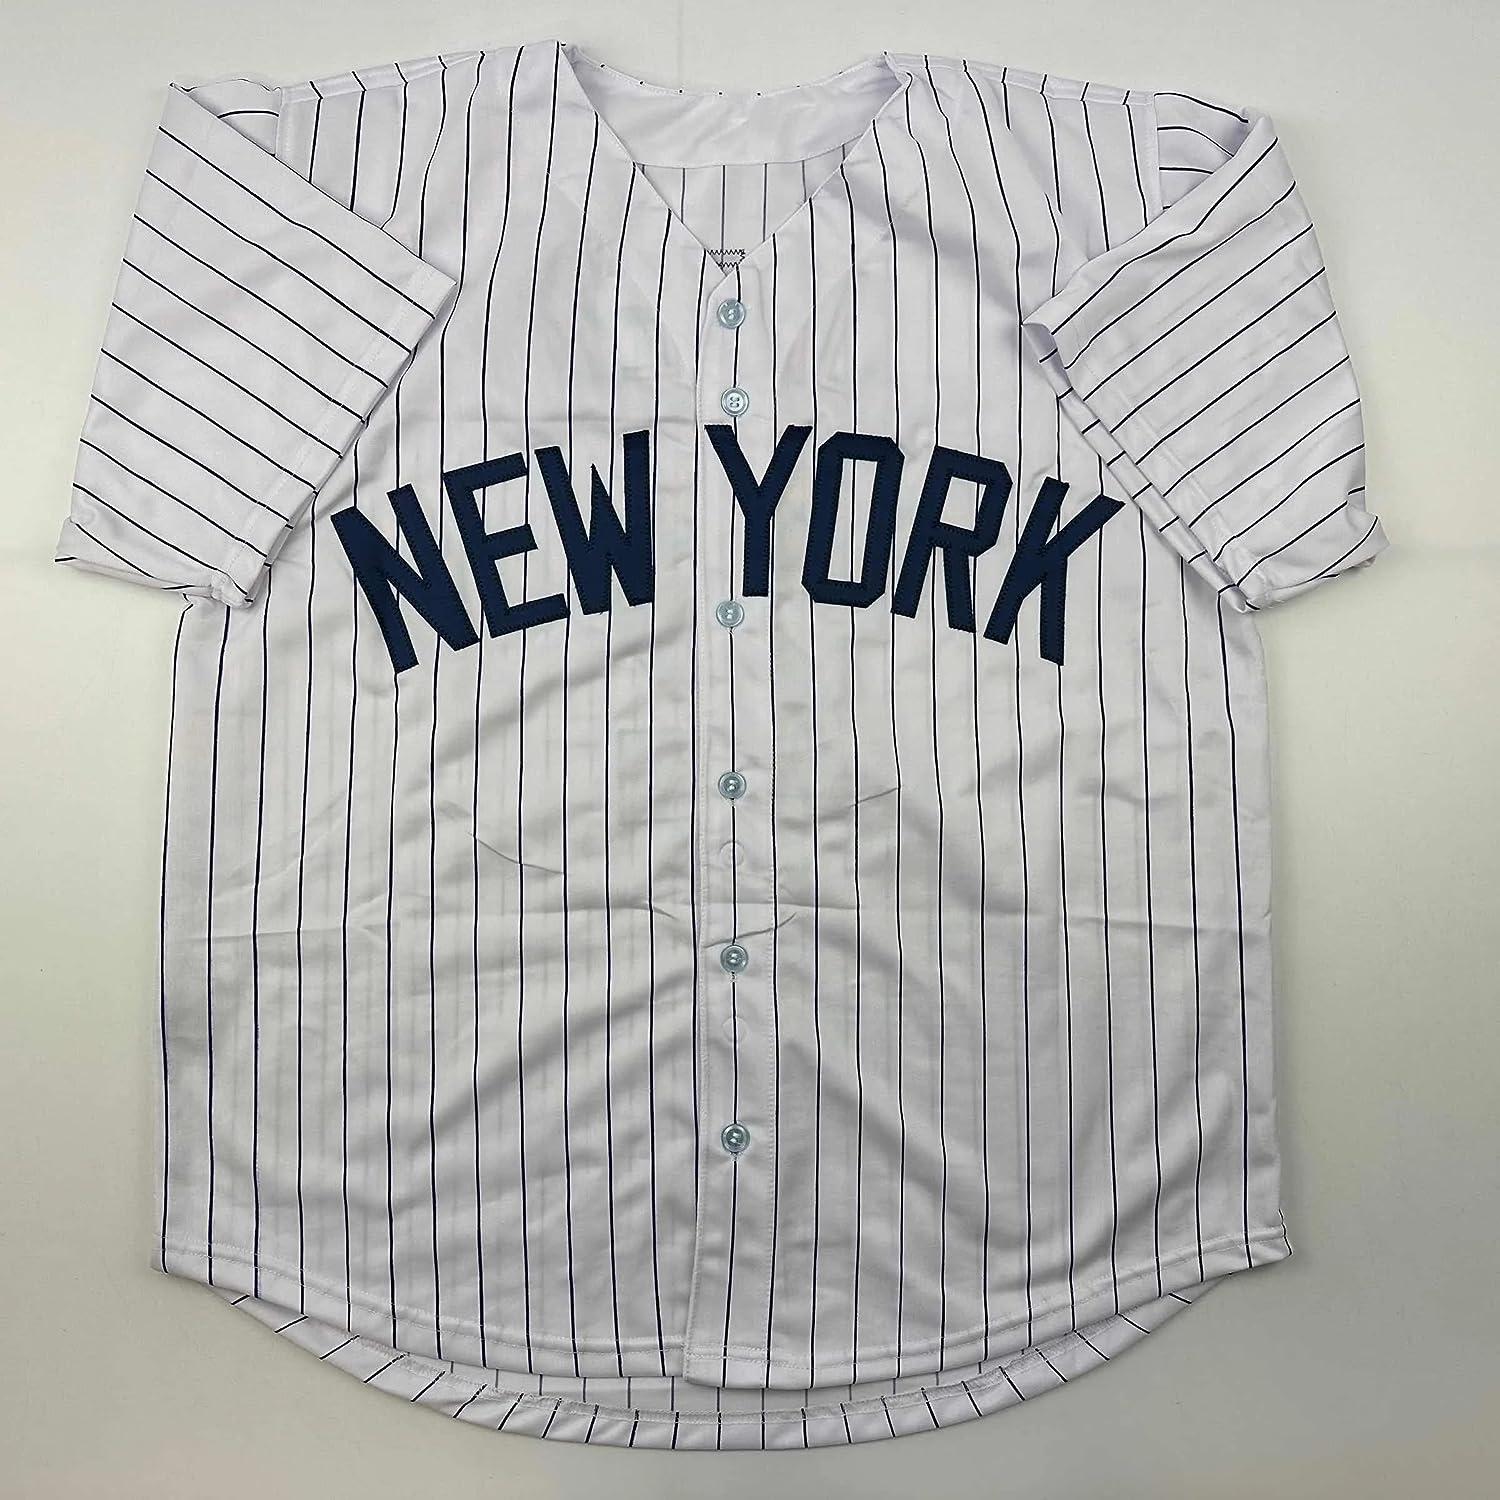 autographed jeter jersey